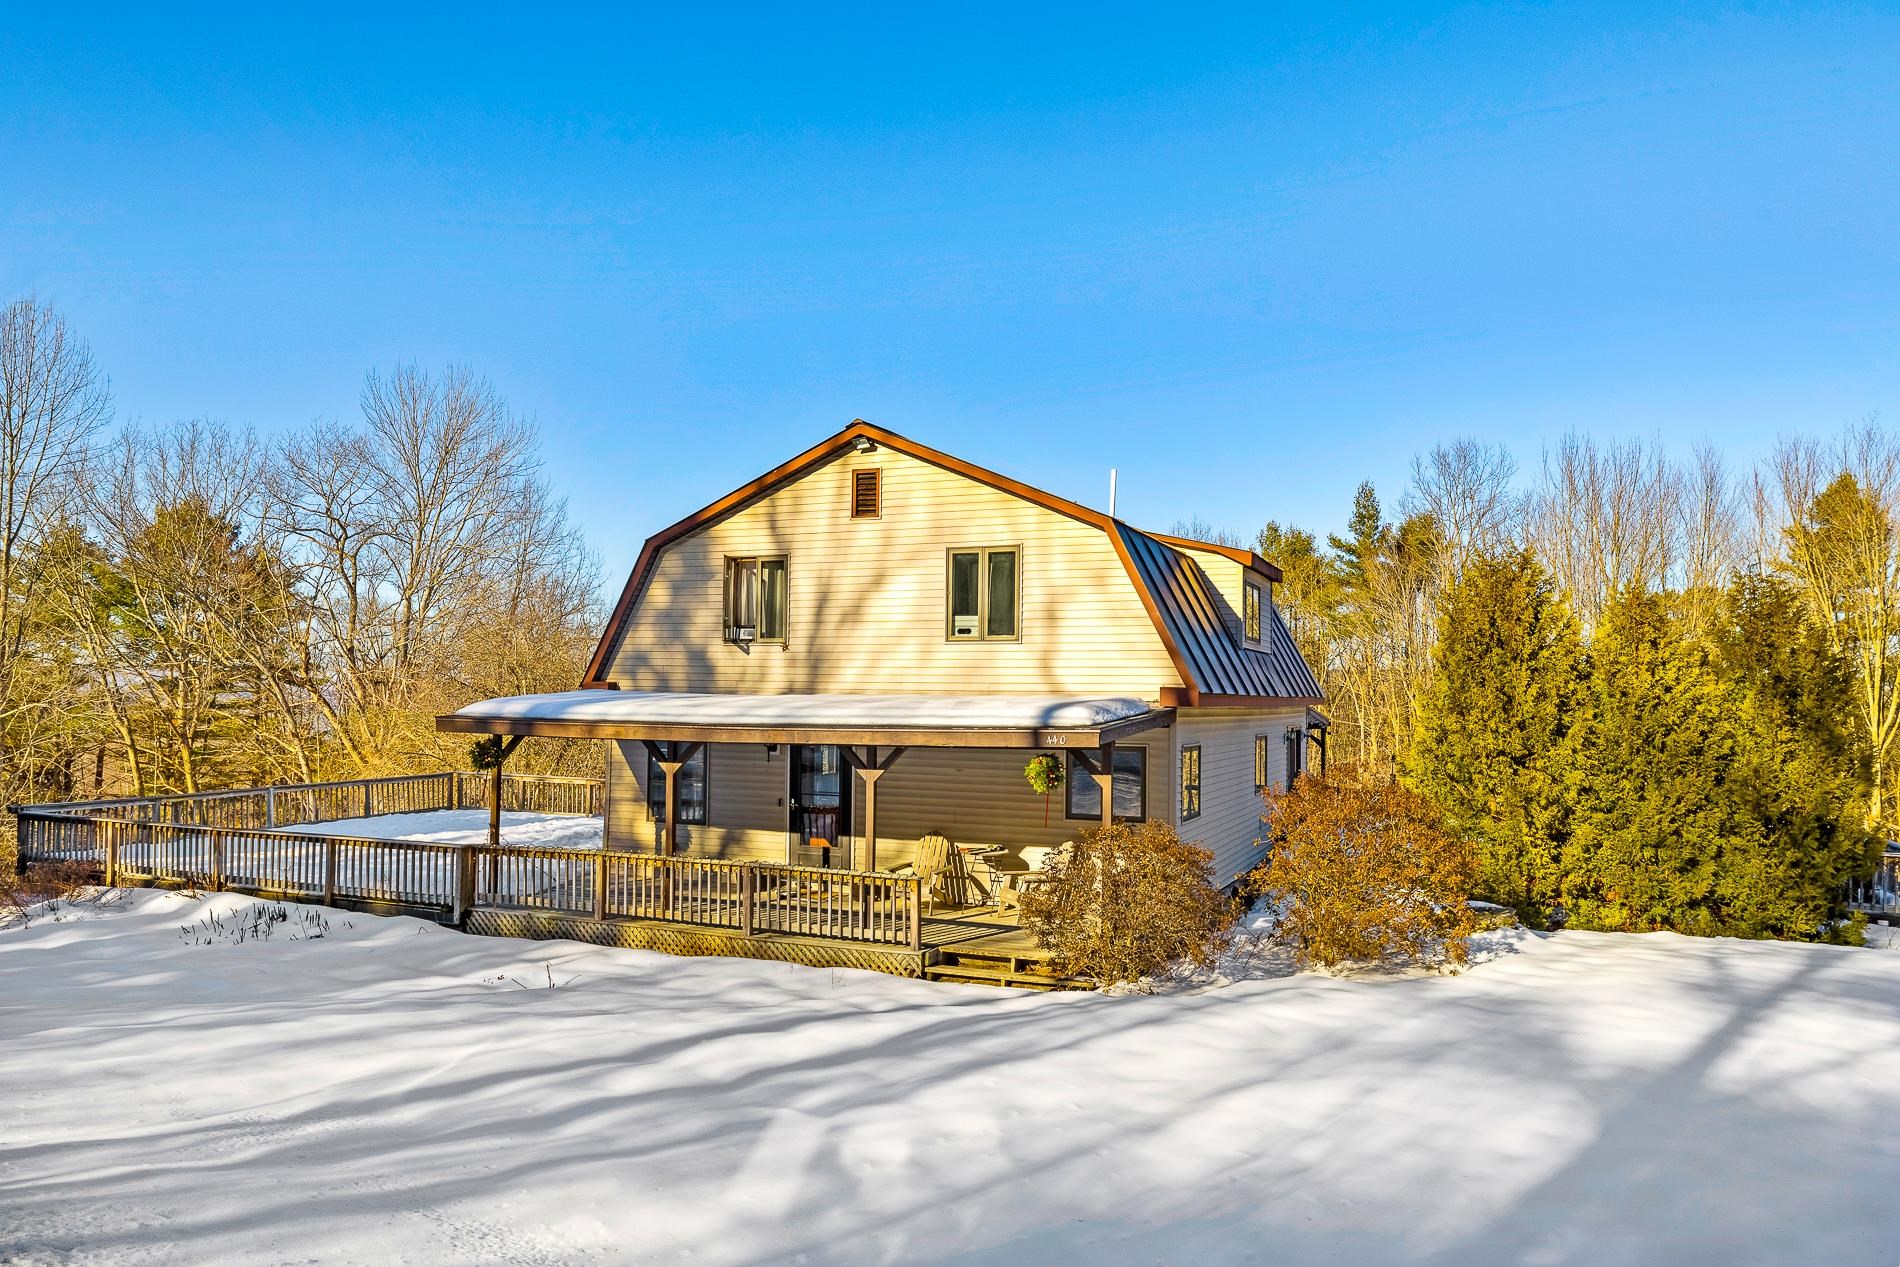 VILLAGE OF WHITE RIVER JUNCTION IN TOWN OF HARTFORD VT Home for sale $$415,000 | $195 per sq.ft.